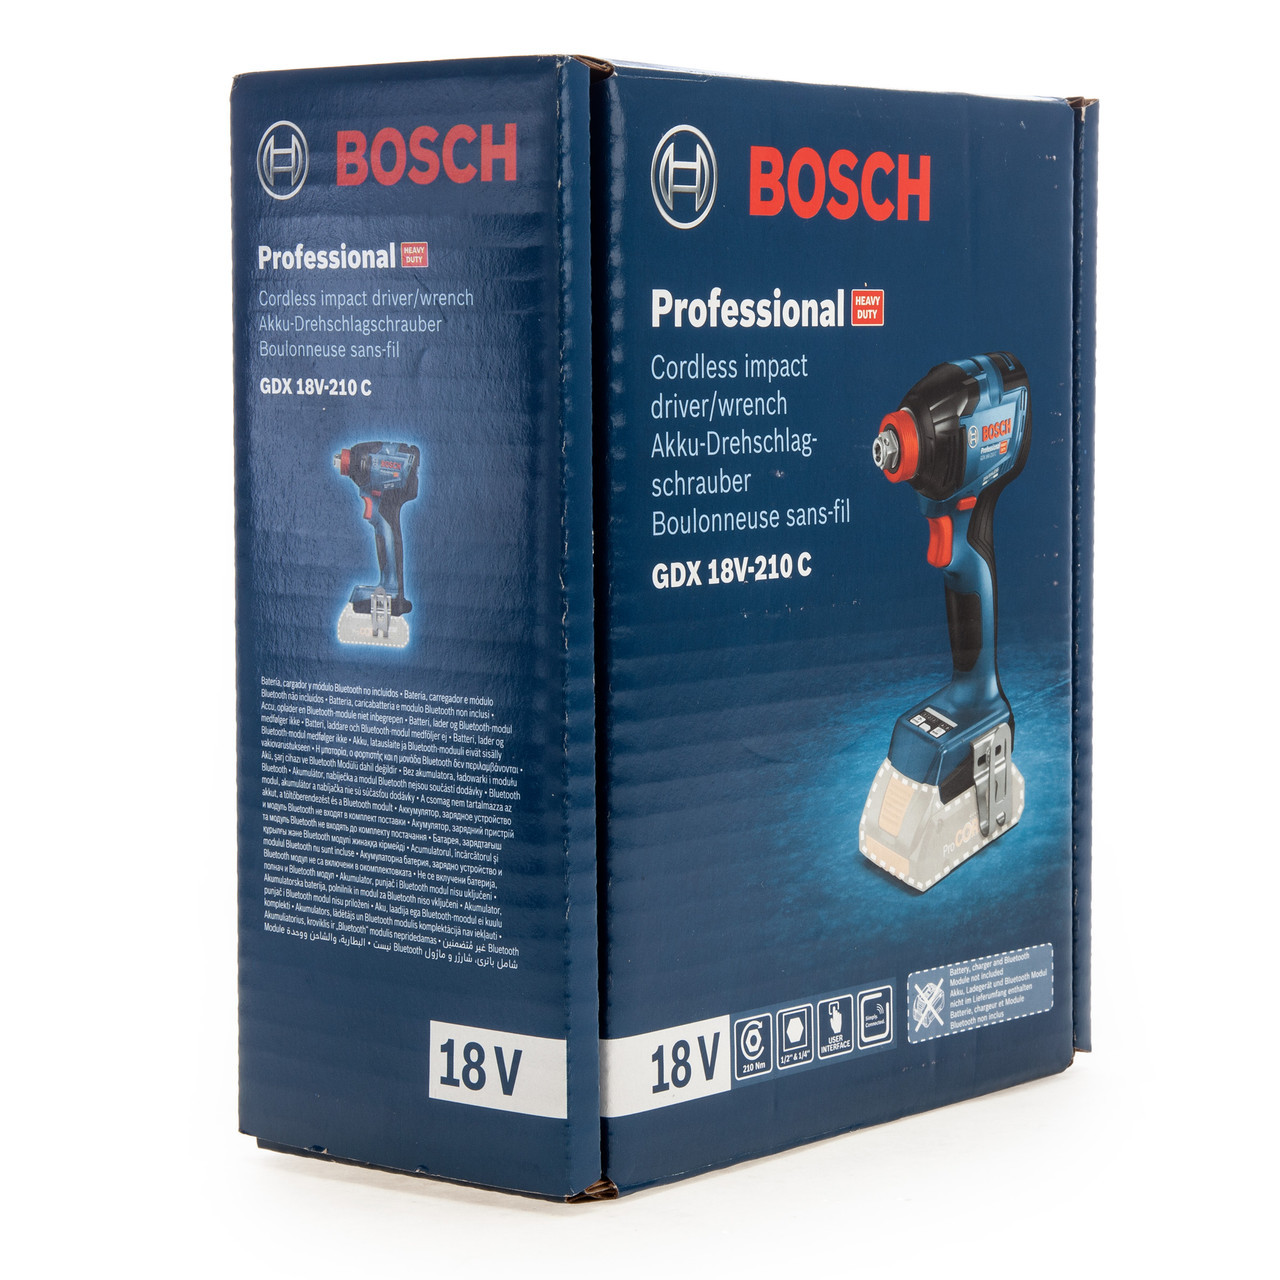 Bosch GDX 18V-210C Professional Brushless Impact Driver/Wrench